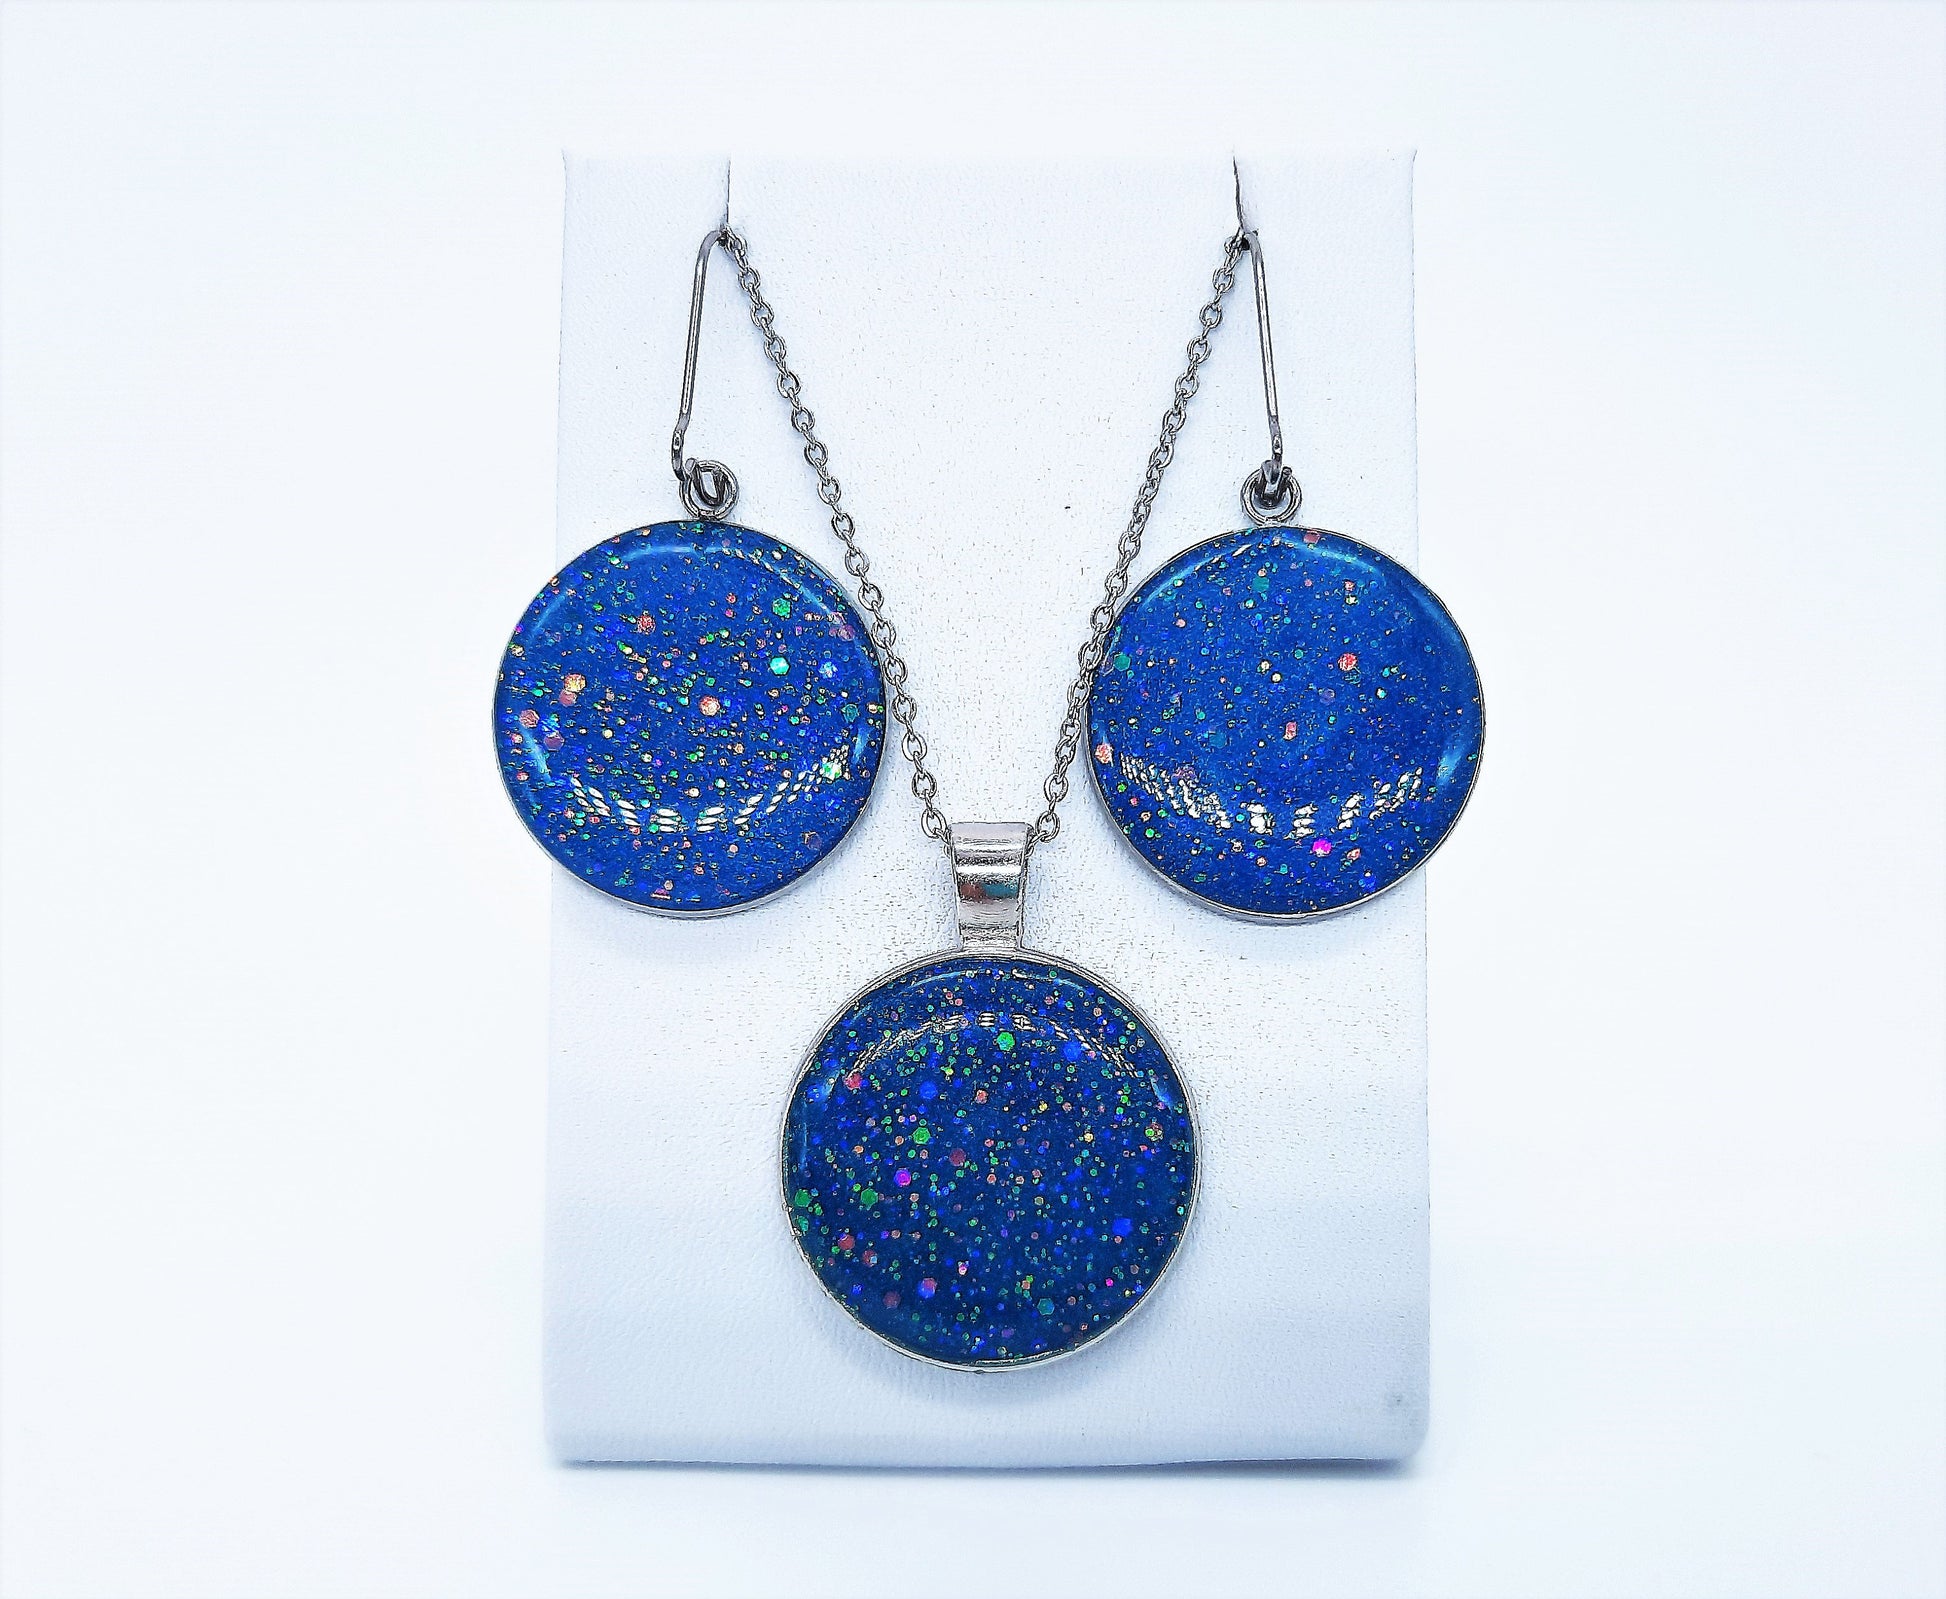 Blue Sparkle Resin Necklace, Earrings, and Bracelet Set - Resin, Mica, Glitter, Glow-in-the-Dark Pigment, Stainless Steel